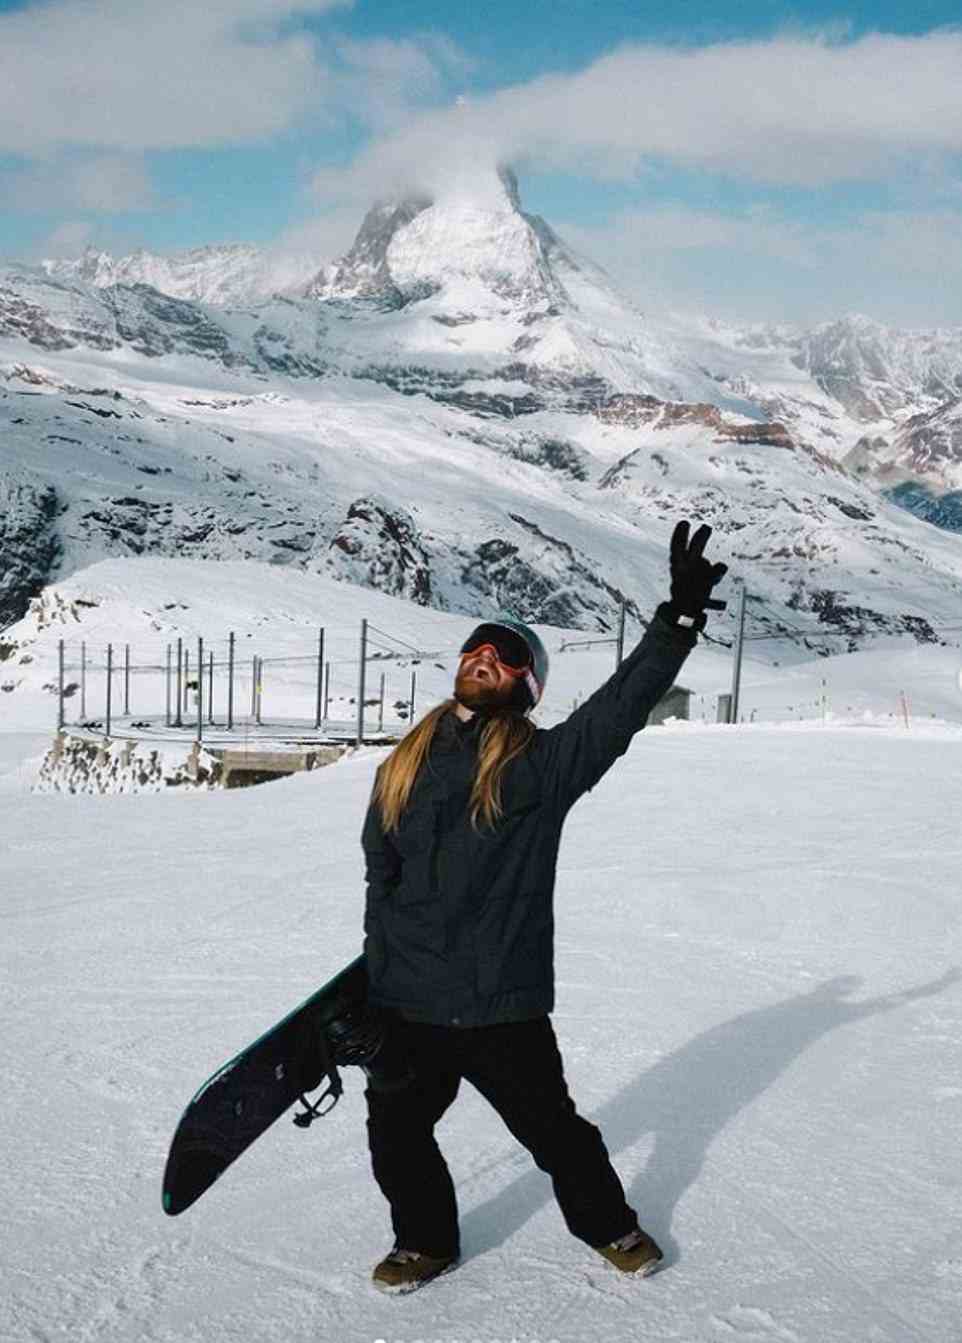 Sam, pictured hitting the slopes on a ski holiday, has more than 12 million followers and 101 million likes, including from pop stars Justin Bieber and Sia on TikTok